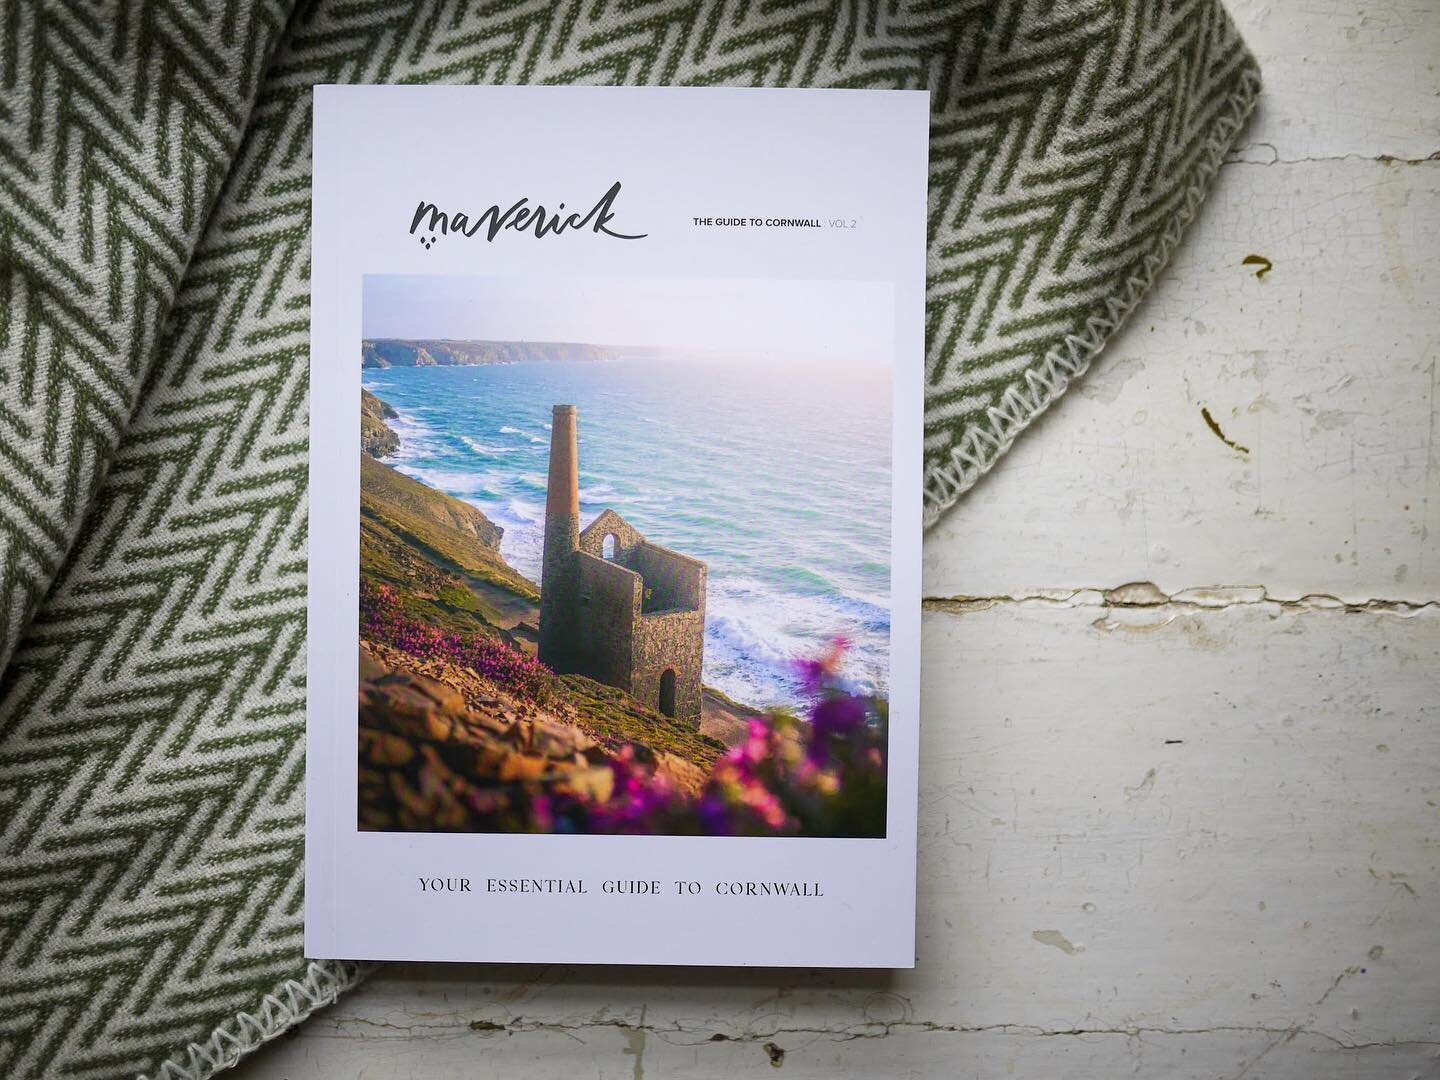 Absolutely thrilled to have been included in the second volume of the very beautifully curated @maverick.guide

Grab yourself a copy and discover all the best places to eat, explore and sleep here in Cornwall!
.
.
.
.
.

#midcornwall #cornwall #homes